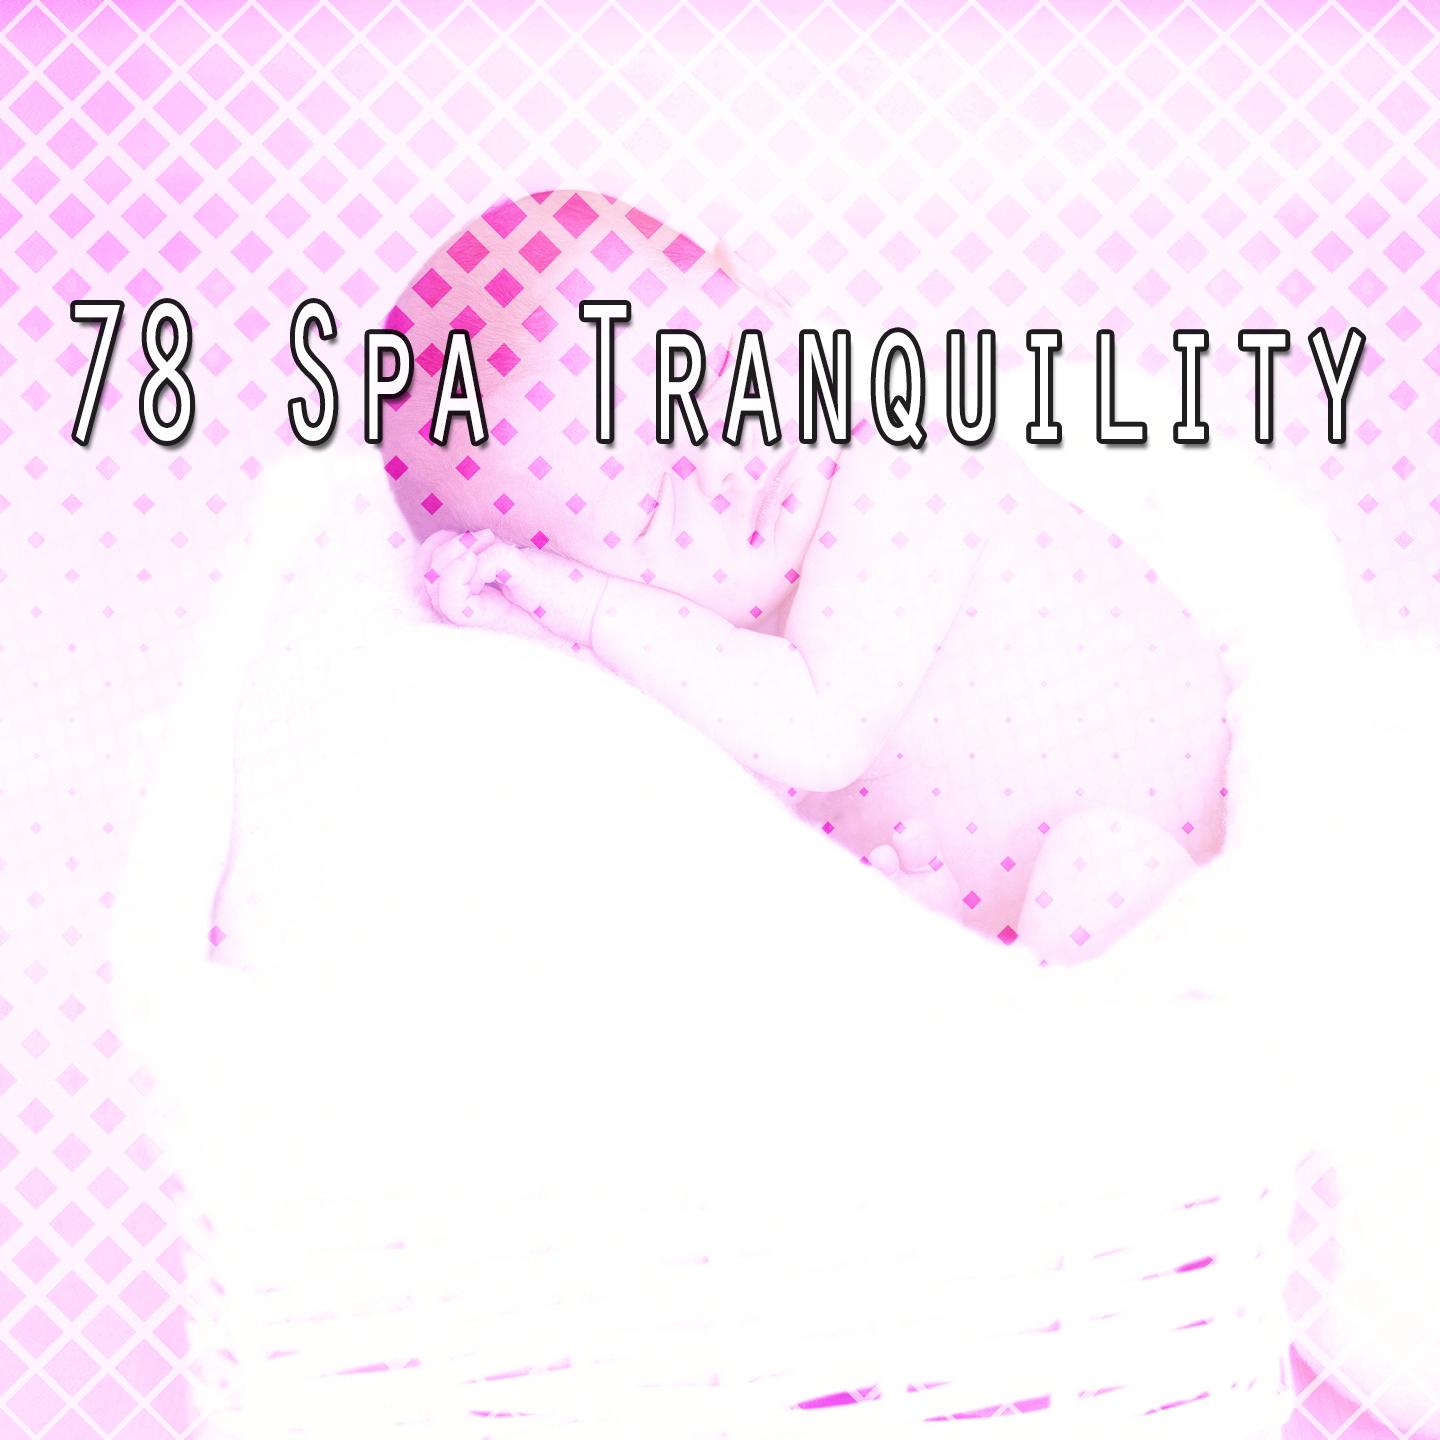 78 Spa Tranquility